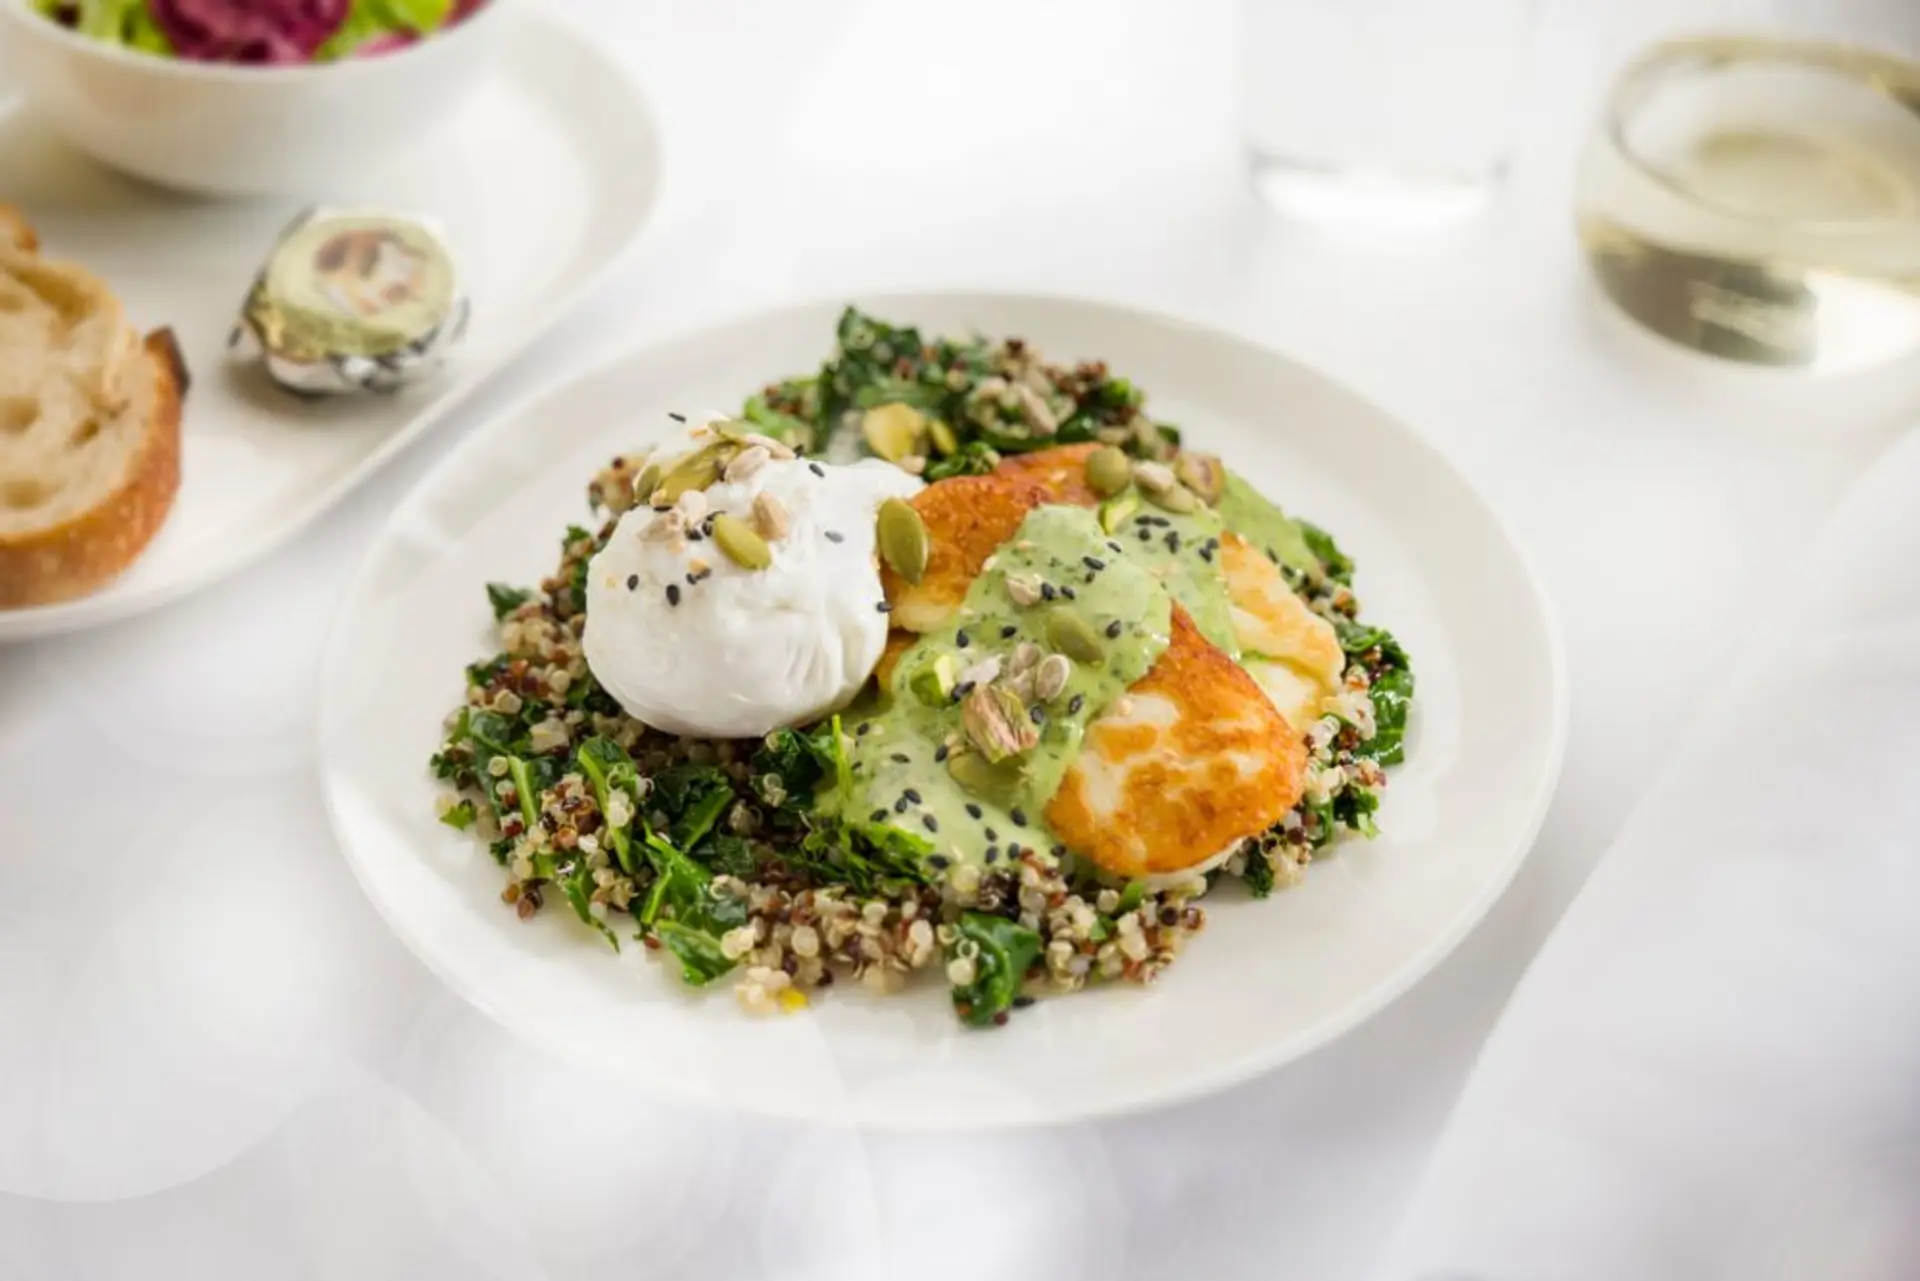 Poached-eggs-with-kale-quinoa-grilled-haloumi-pistachios-seeds-and-herbed-tahini-dressing-Business-breakfast-menu-ex-PERL-1000x667.jpg